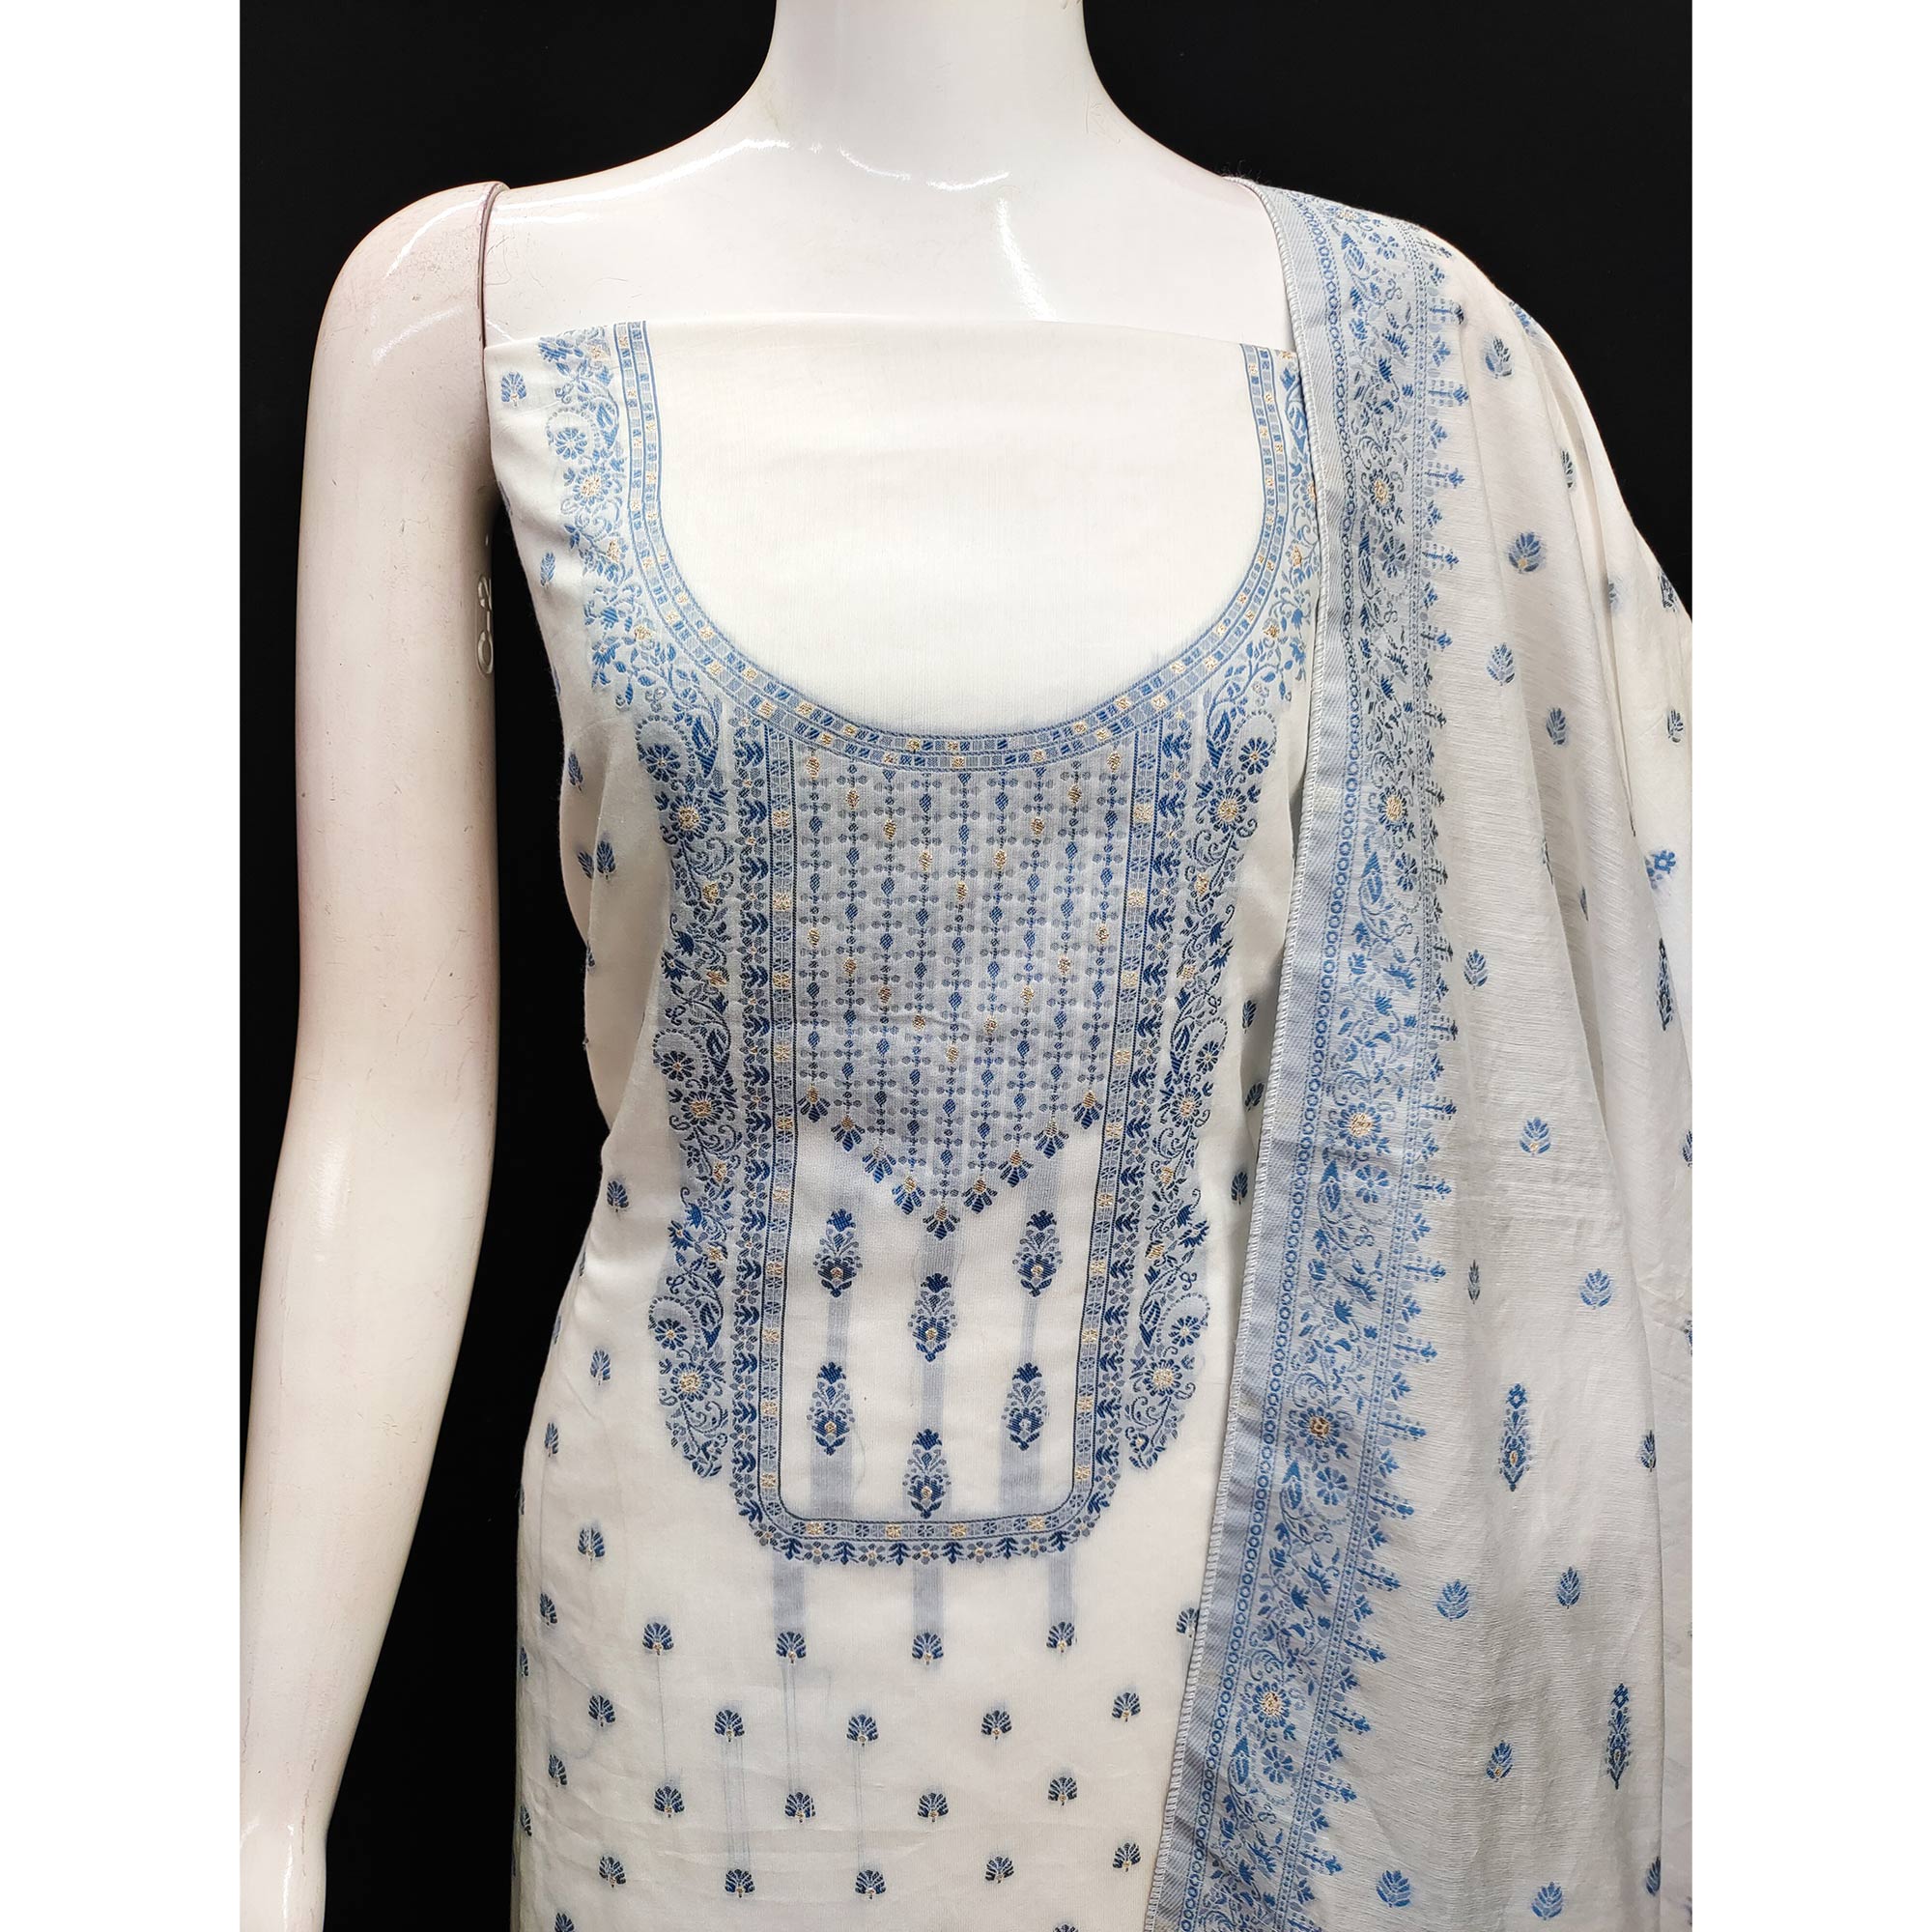 White & Blue Floral Woven Muslin Dress Material